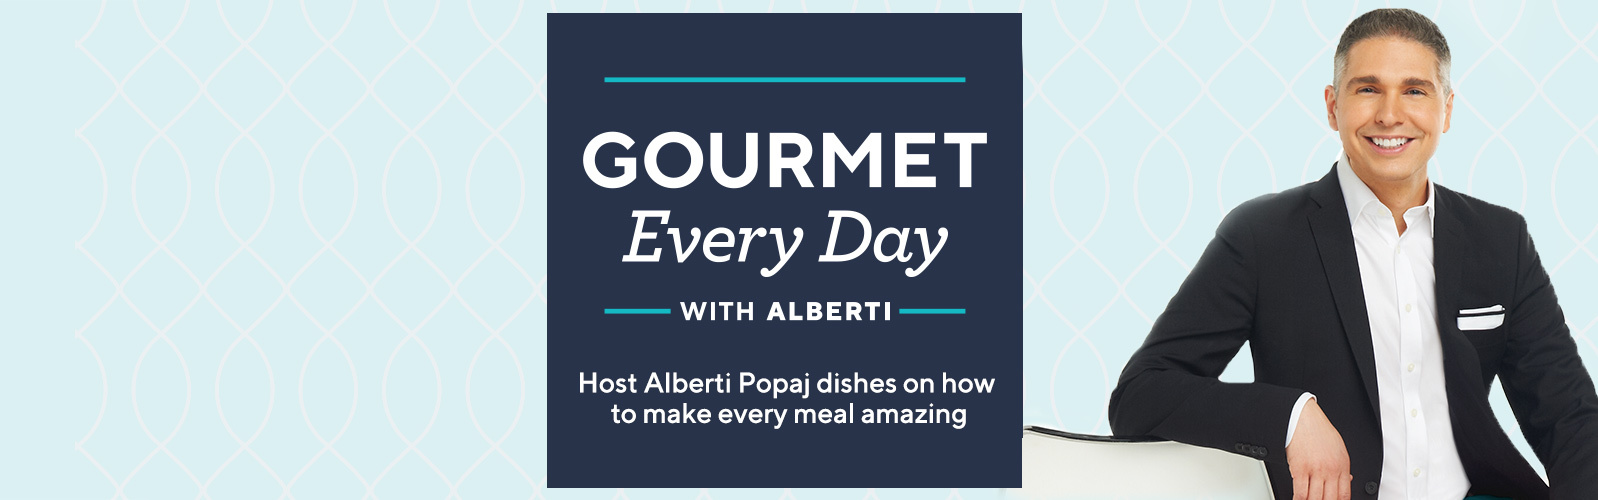 Host Alberti Popaj dishes on how to make every meal amazing